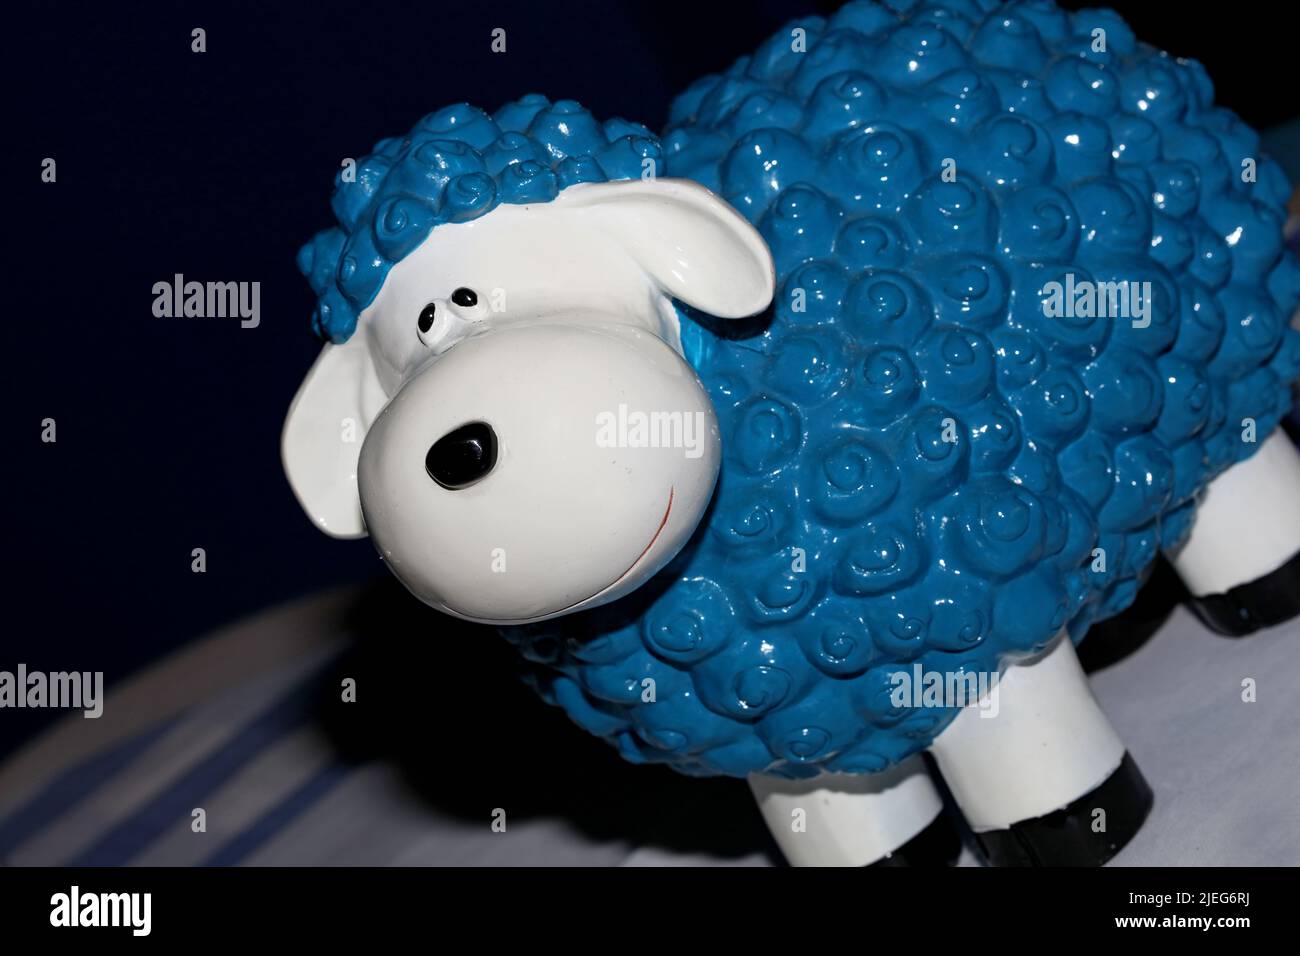 Clay sheep with white face and blue body macro modern background high quality print Stock Photo